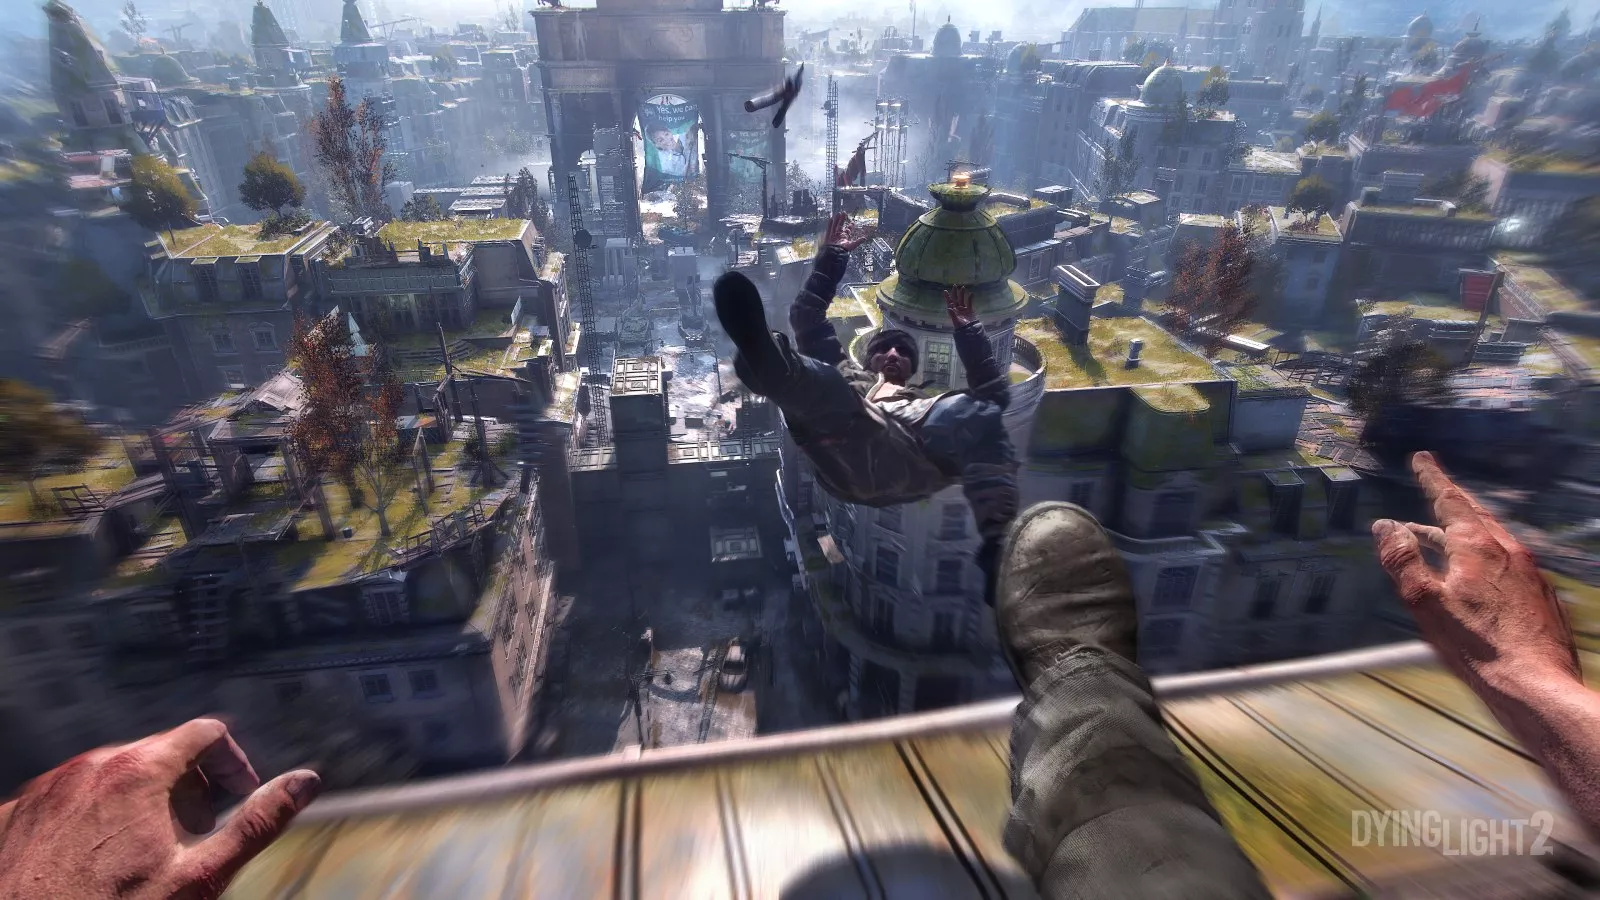 Dying Light 2 crossplay details and how to play online co-op with